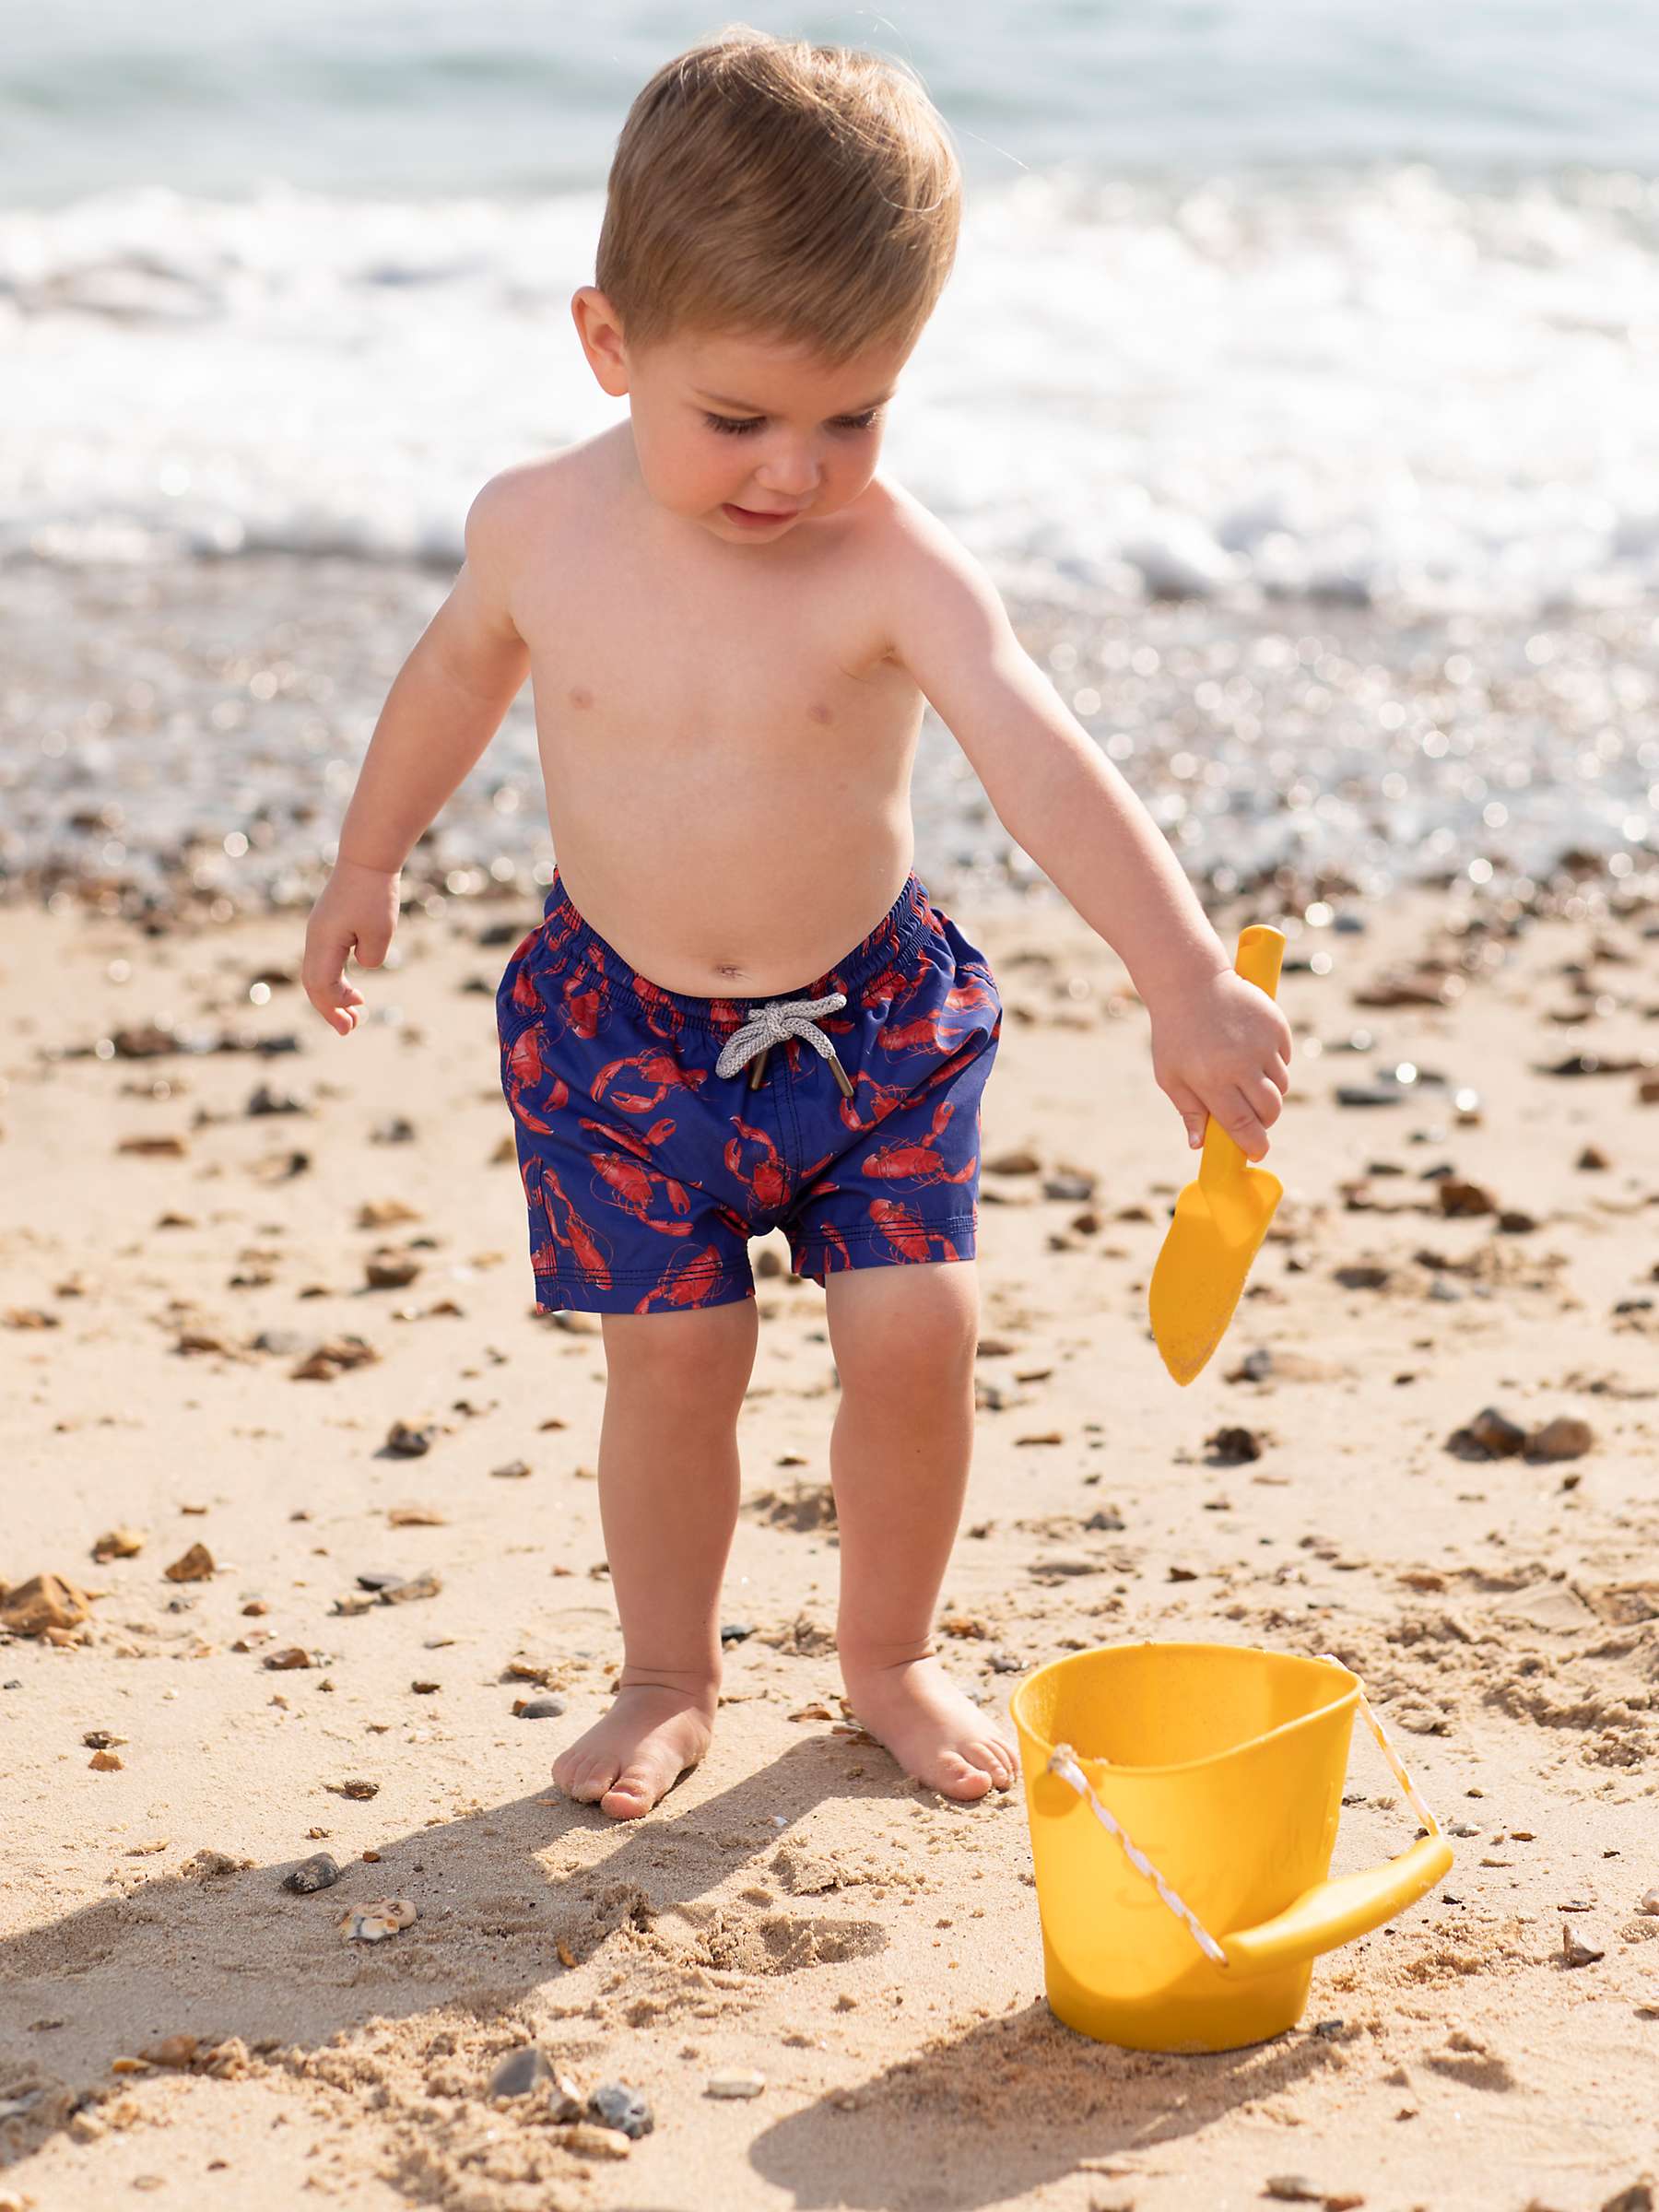 Buy Trotters Baby Lobster Swim Shorts, Navy Online at johnlewis.com